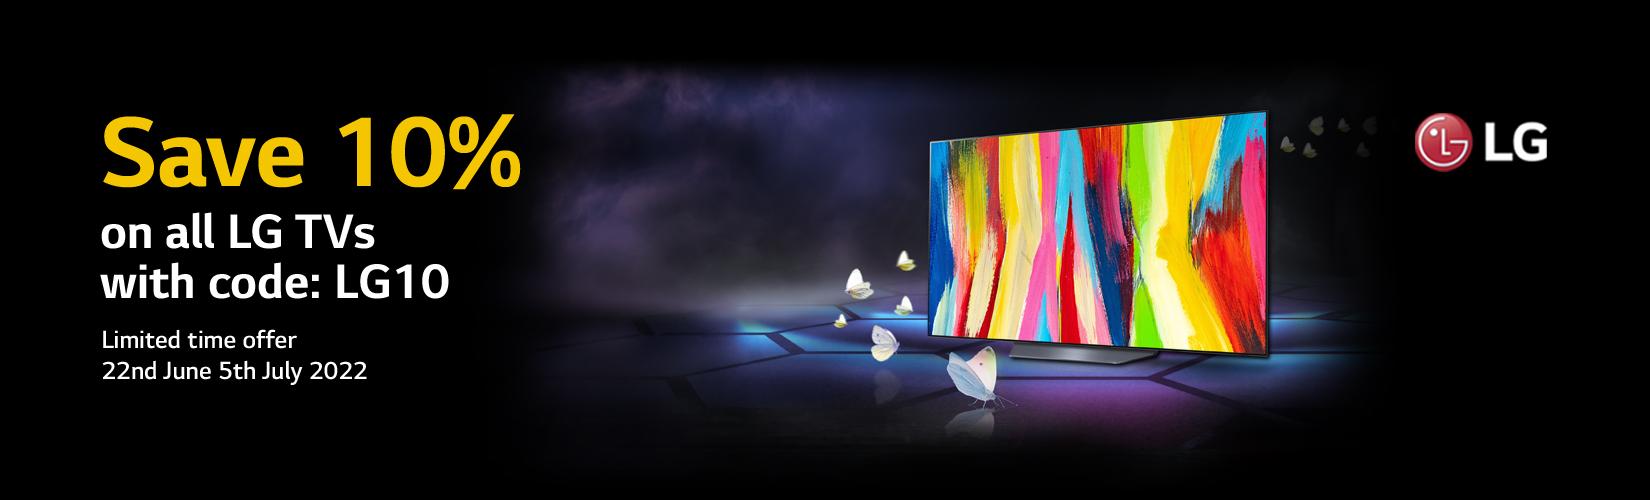 Save 10% on all LG TVs with code: LG10.